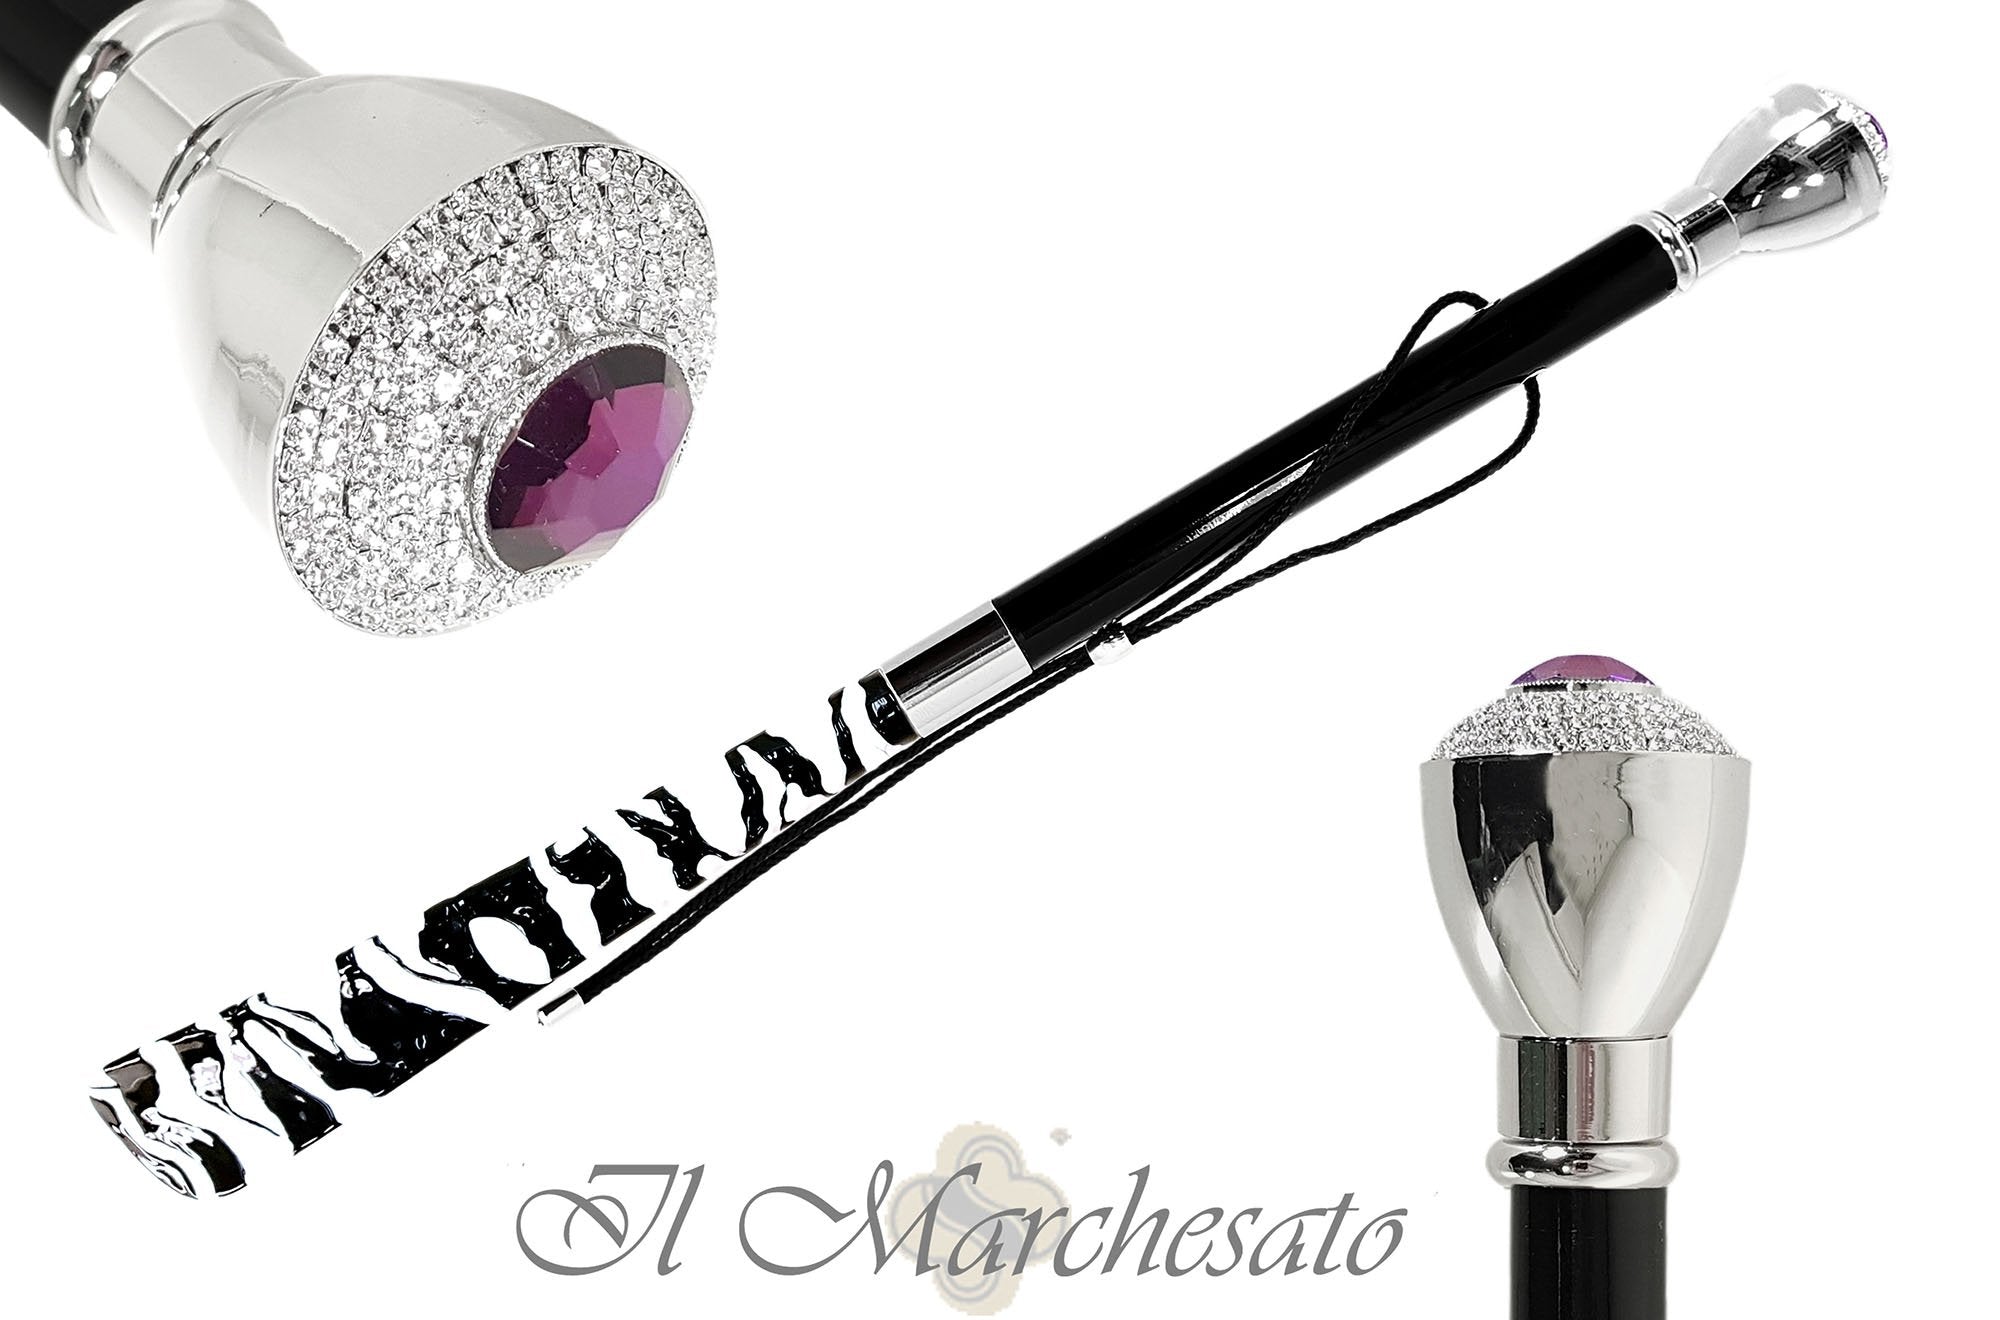 Luxury Silver-Plated Shoehorn - il-marchesato